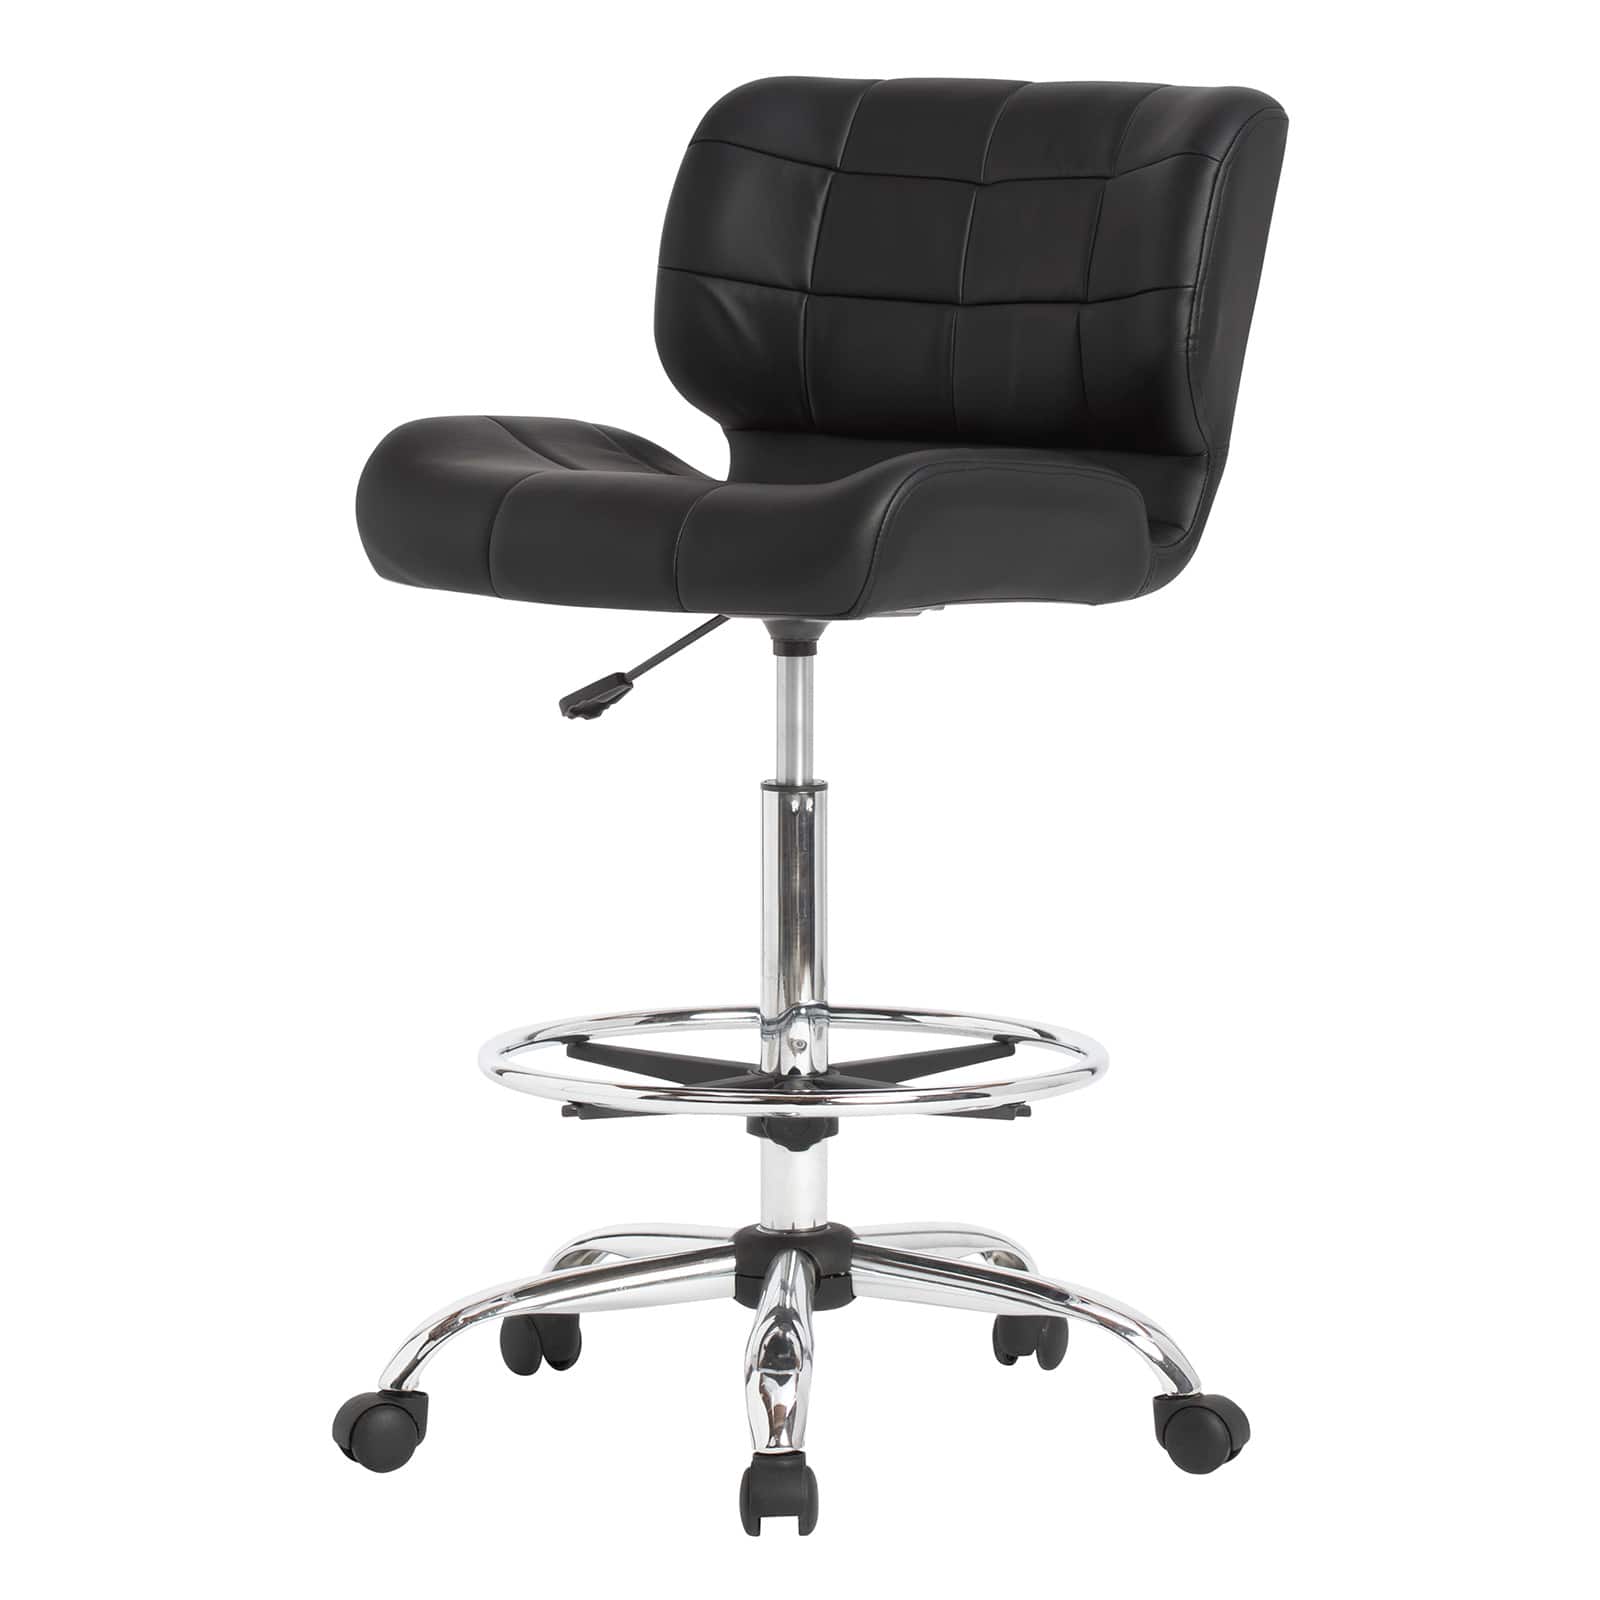 Studio Designs Crest Black Height Adjustable Drafting Chair with Footring